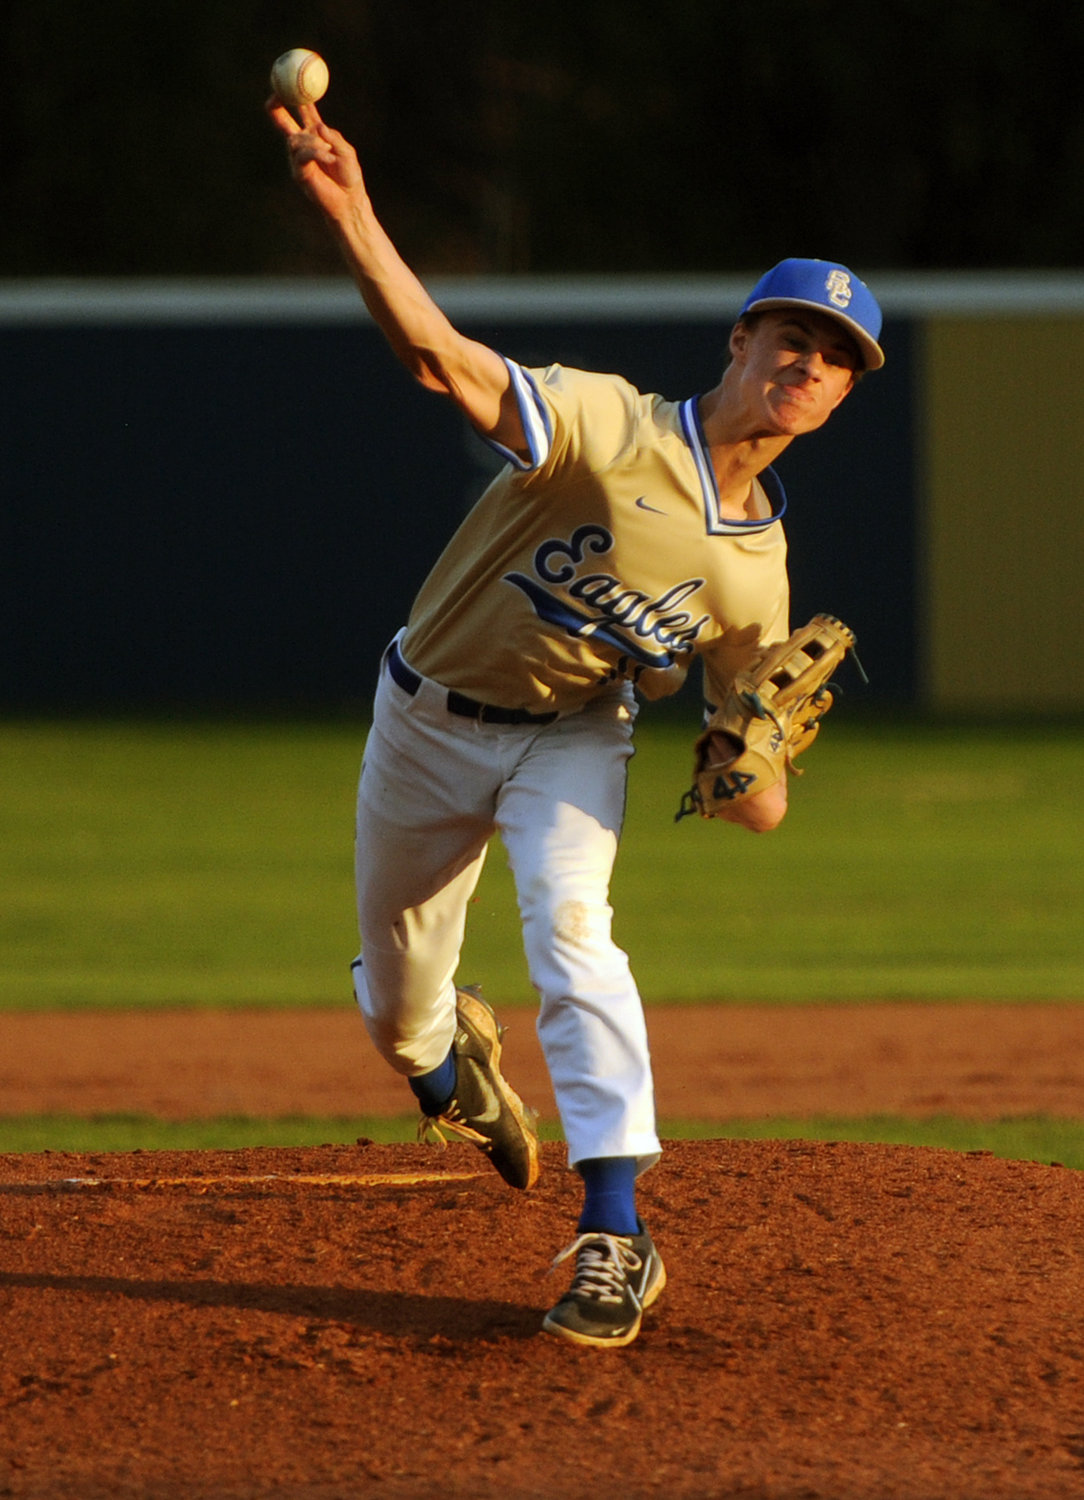 William Bobo delivers a pitch in the first inning against the Rockets.